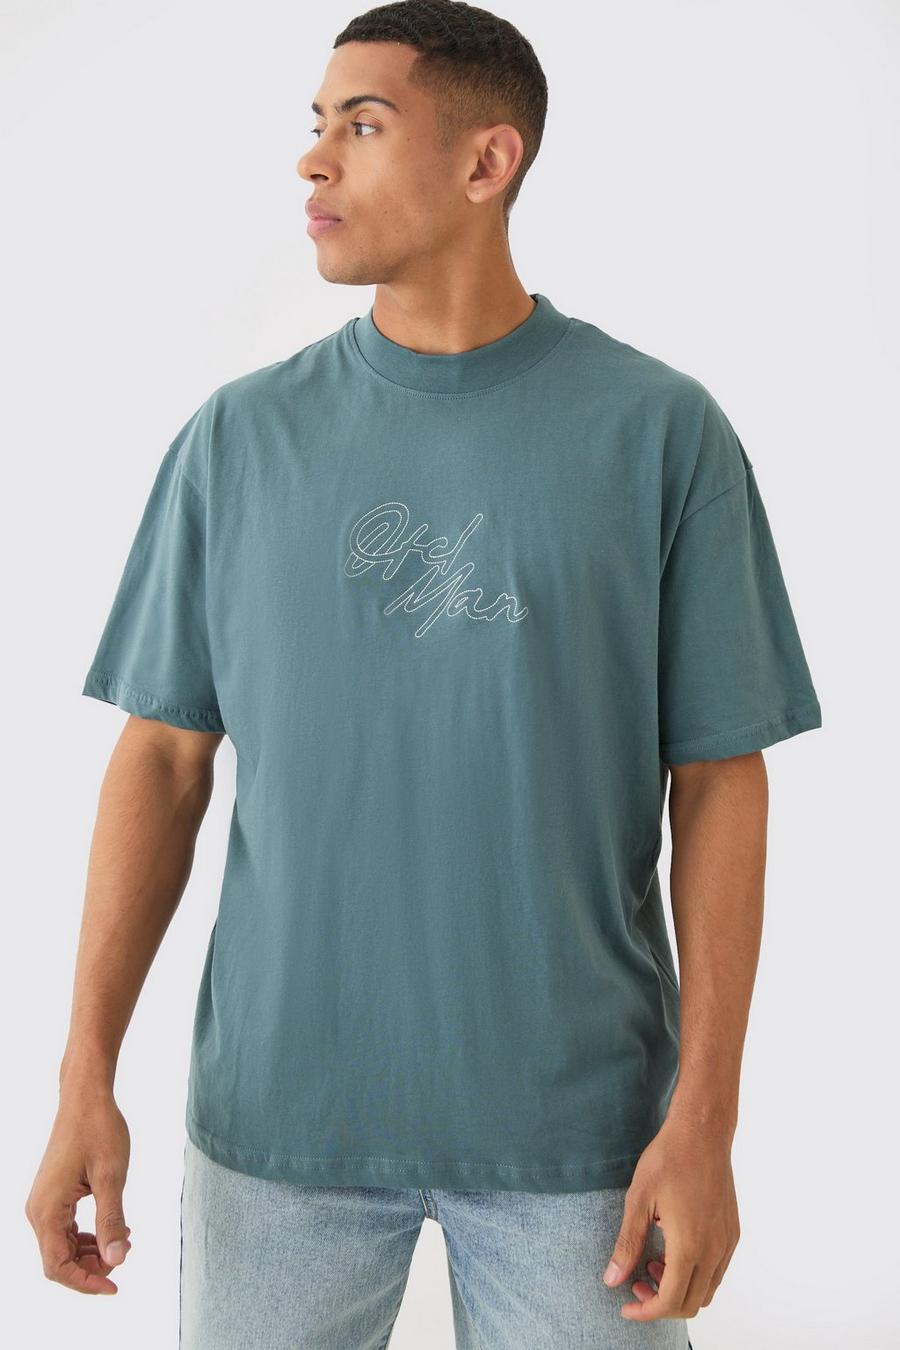 Slate blue Oversized Extended Neck Chain Stitch Embroidered Man T-shirt